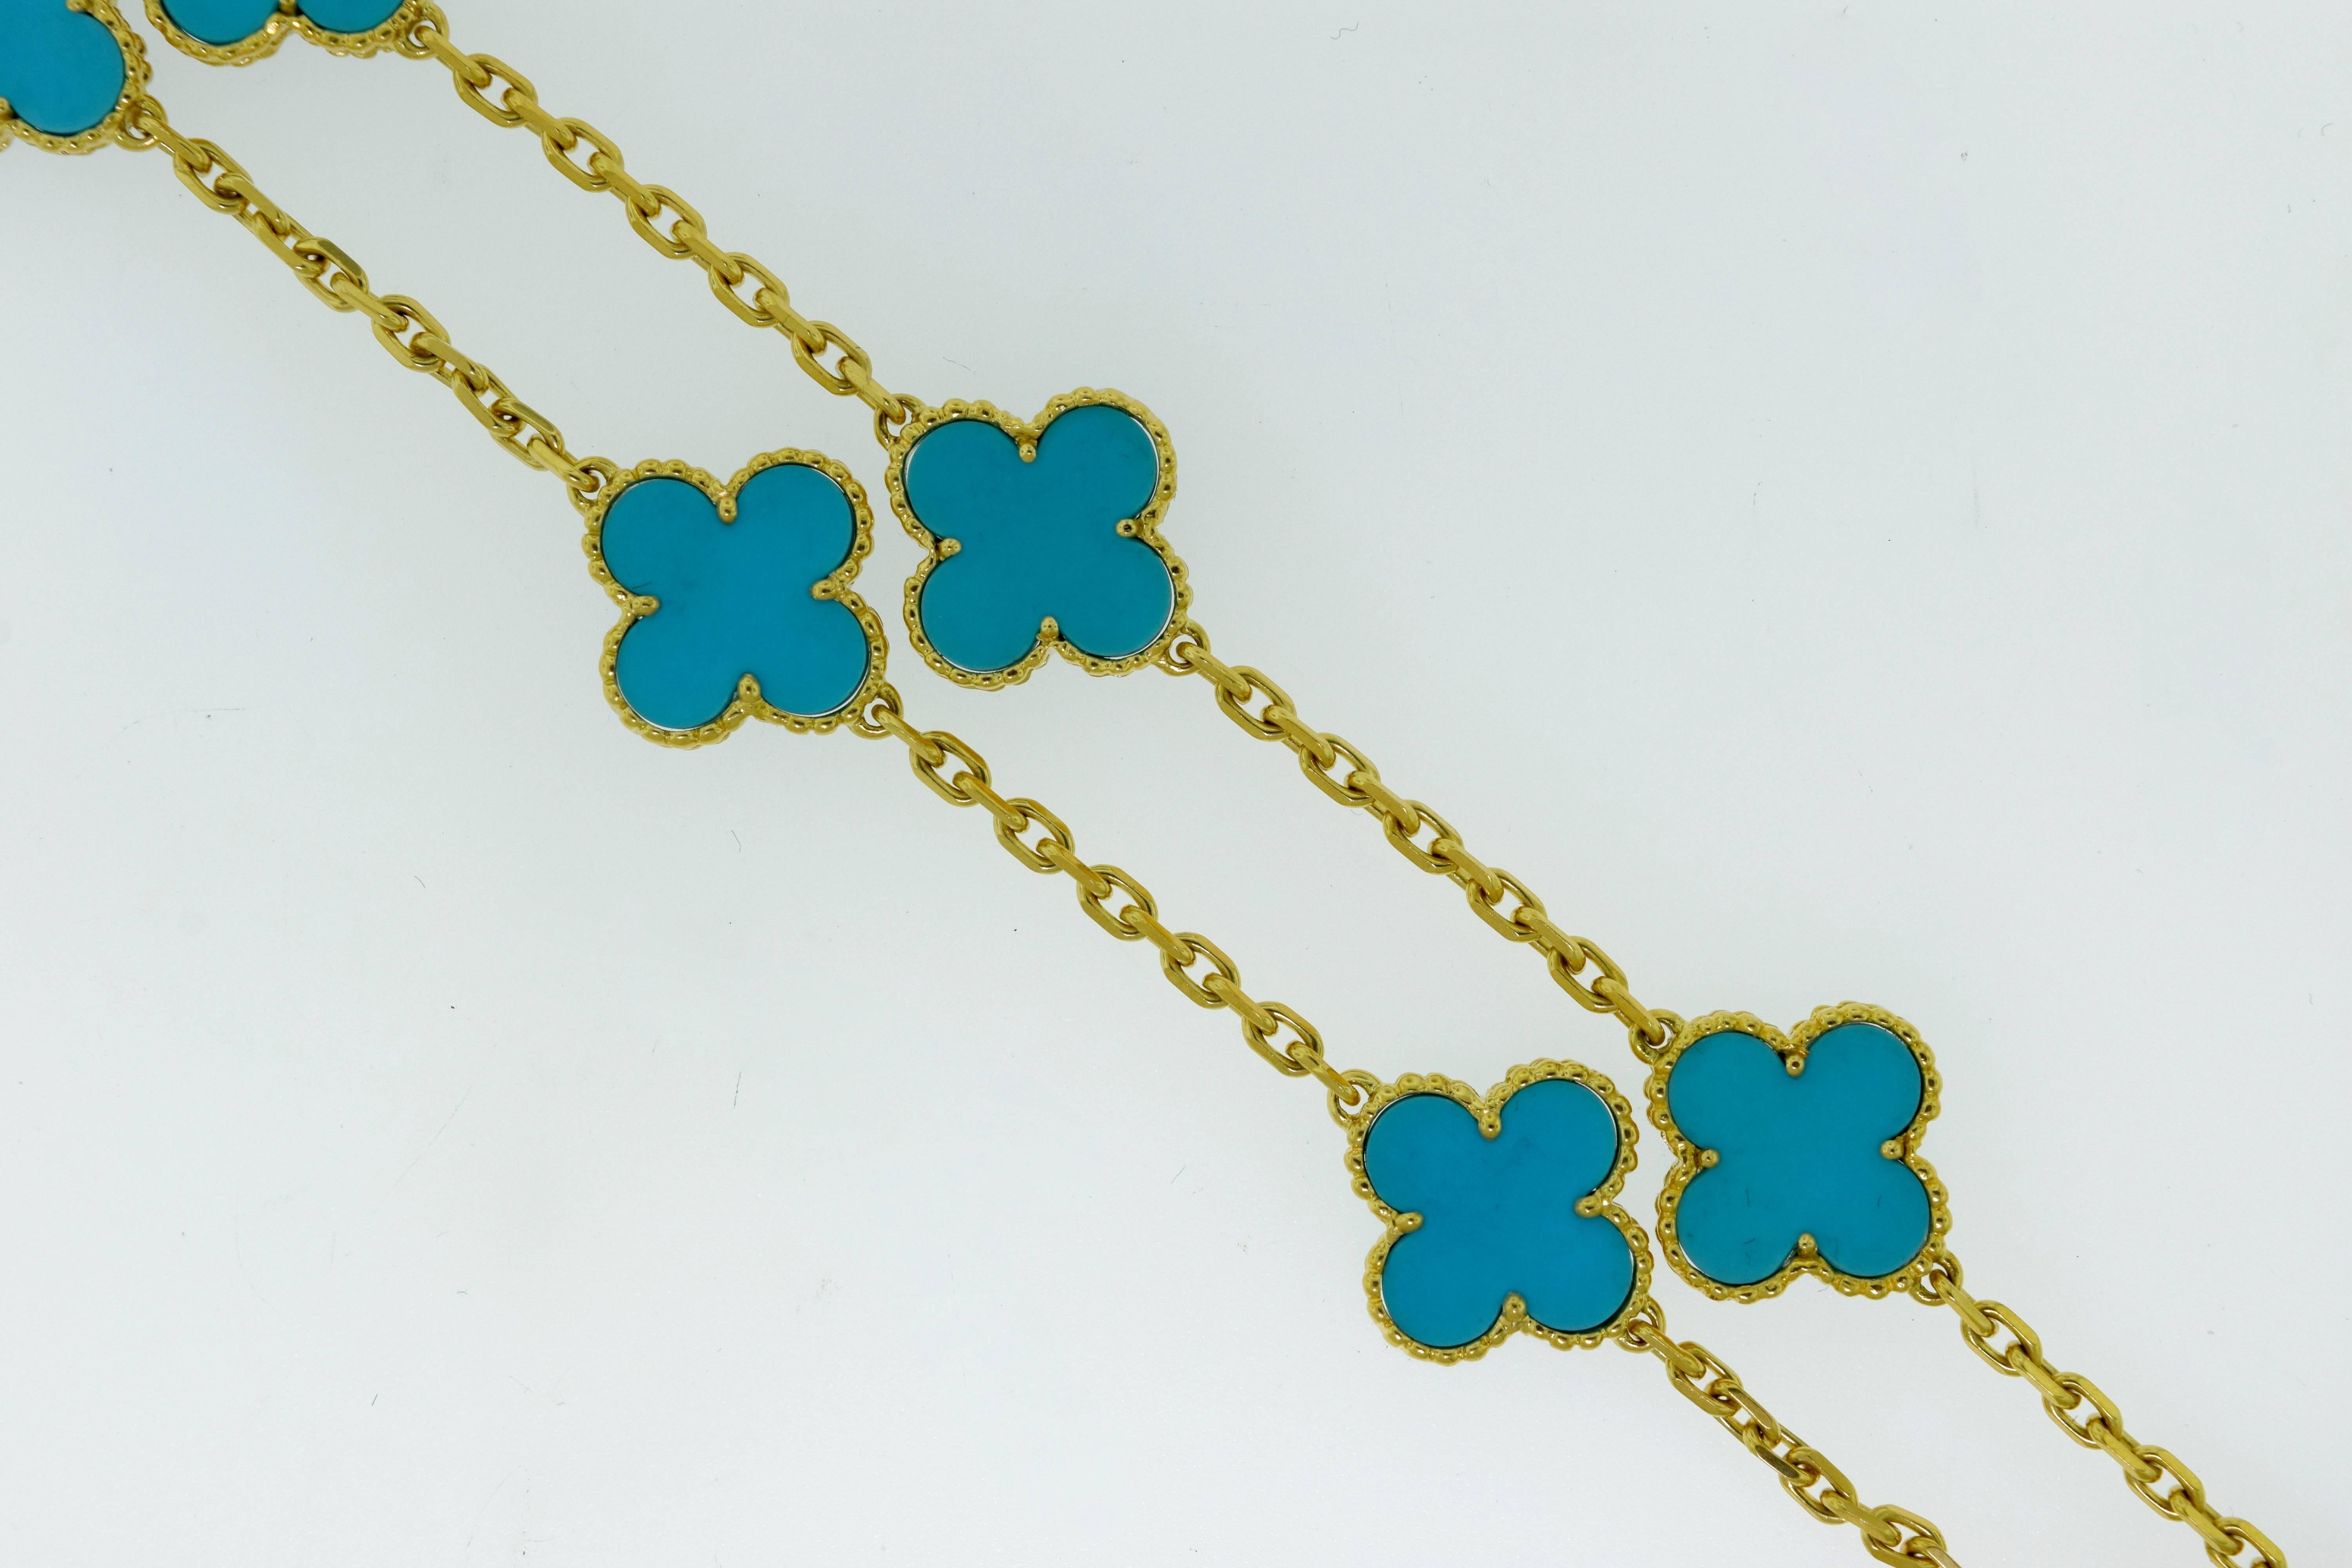 with Papers.

Designer: Van Cleef & Arpels
Collection: Vintage Alhambra
Metal: 18k Yellow Gold
Stones: Turquoise
Total Item Weight (grams): 21.26
Length: approx 16.75